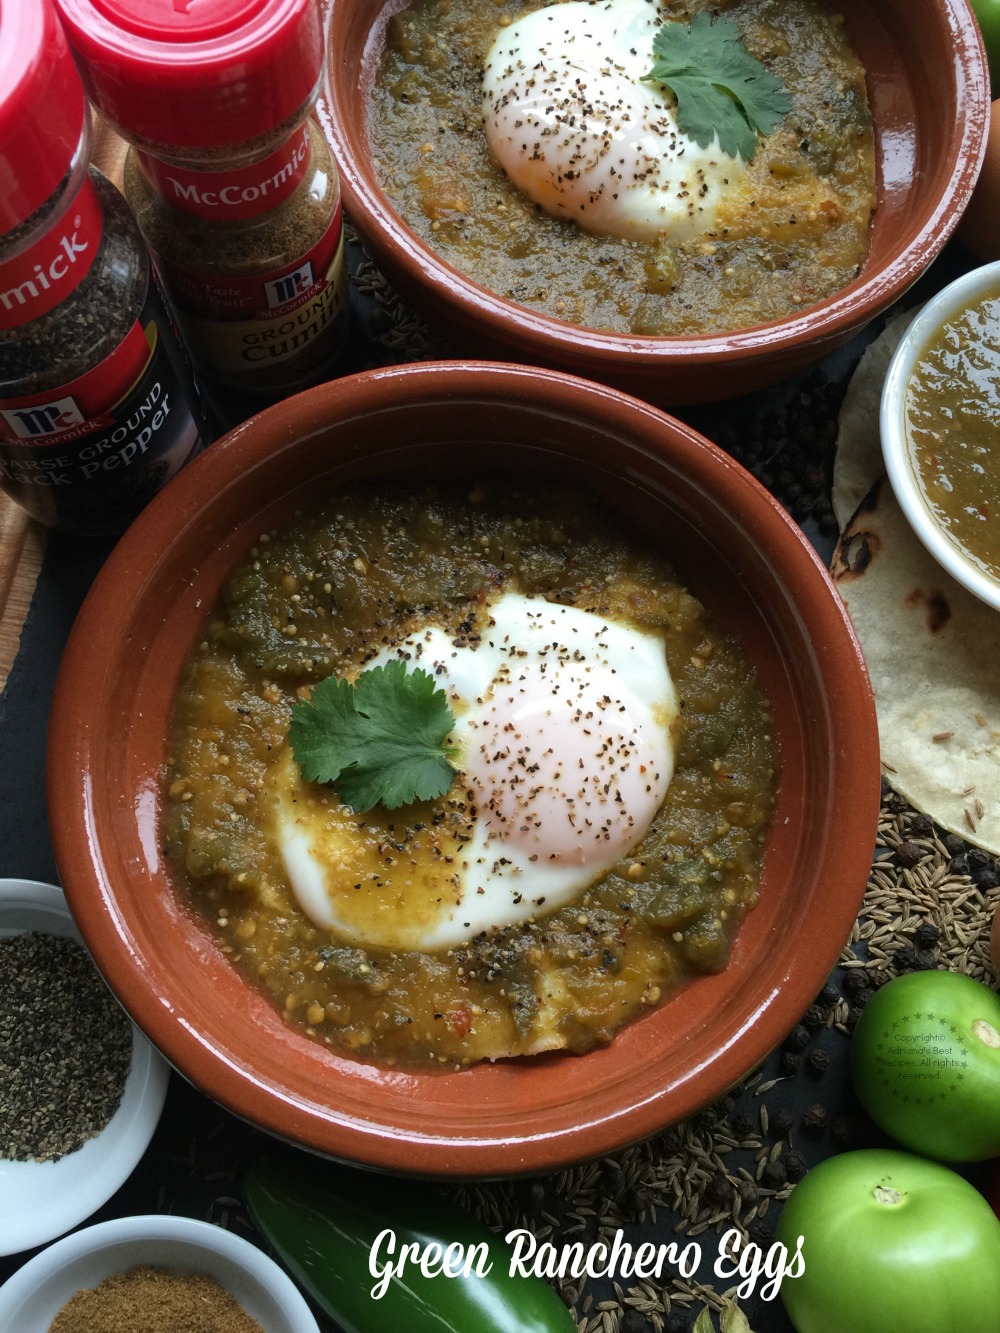 Green Ranchero Eggs recipe for the celebration of my Mexican culture and traditions